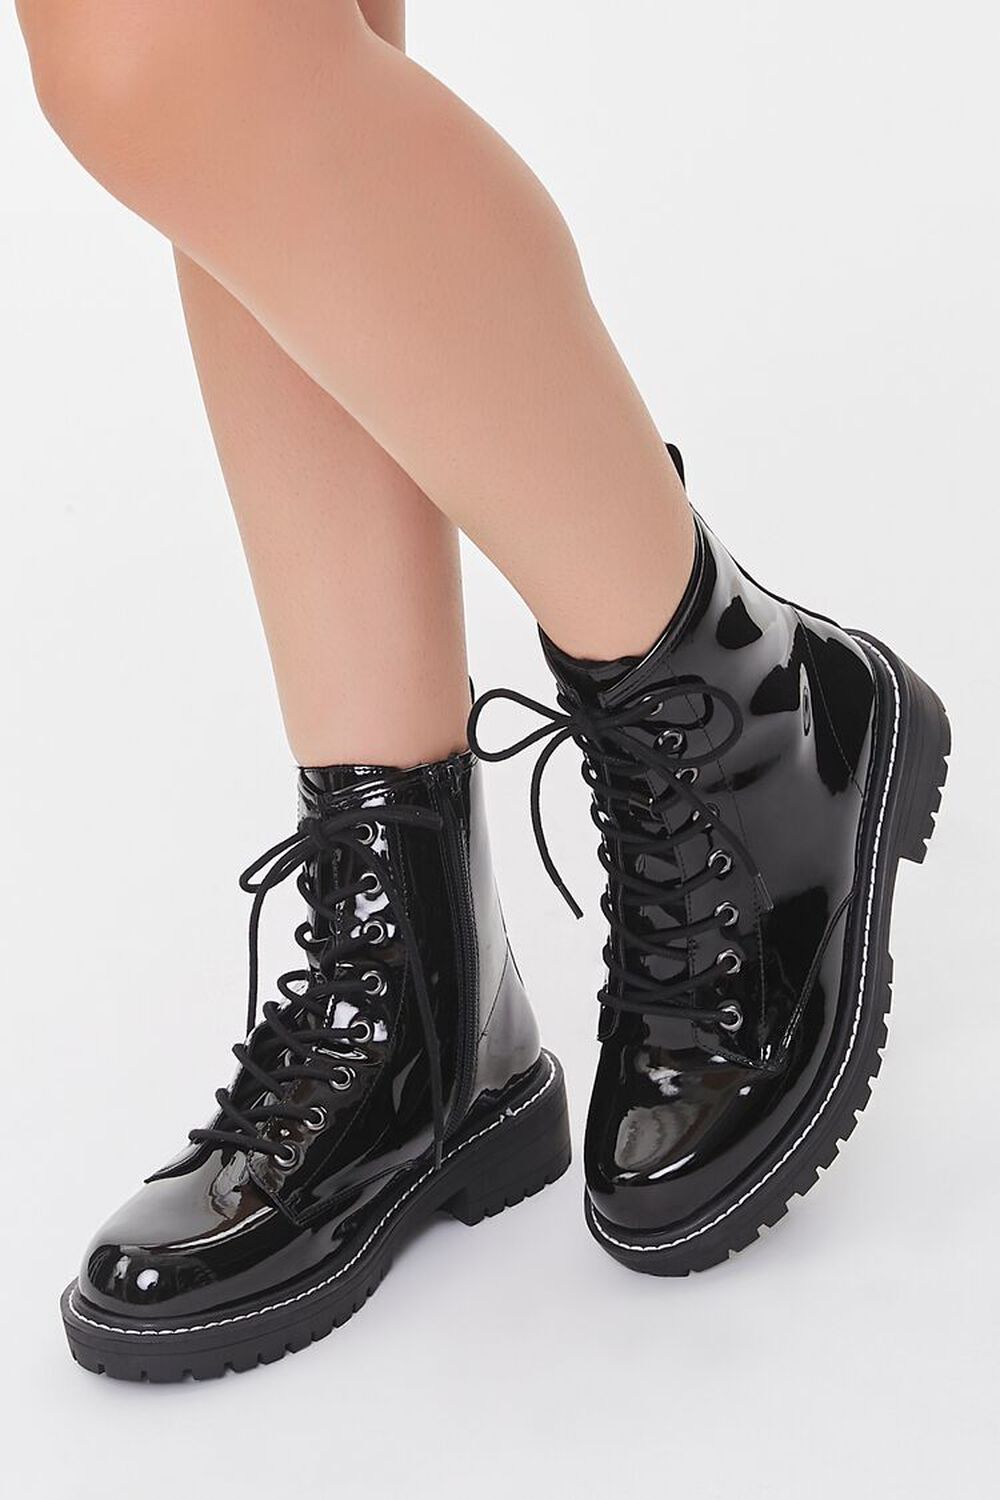 Faux Patent Leather Combat Booties, image 1